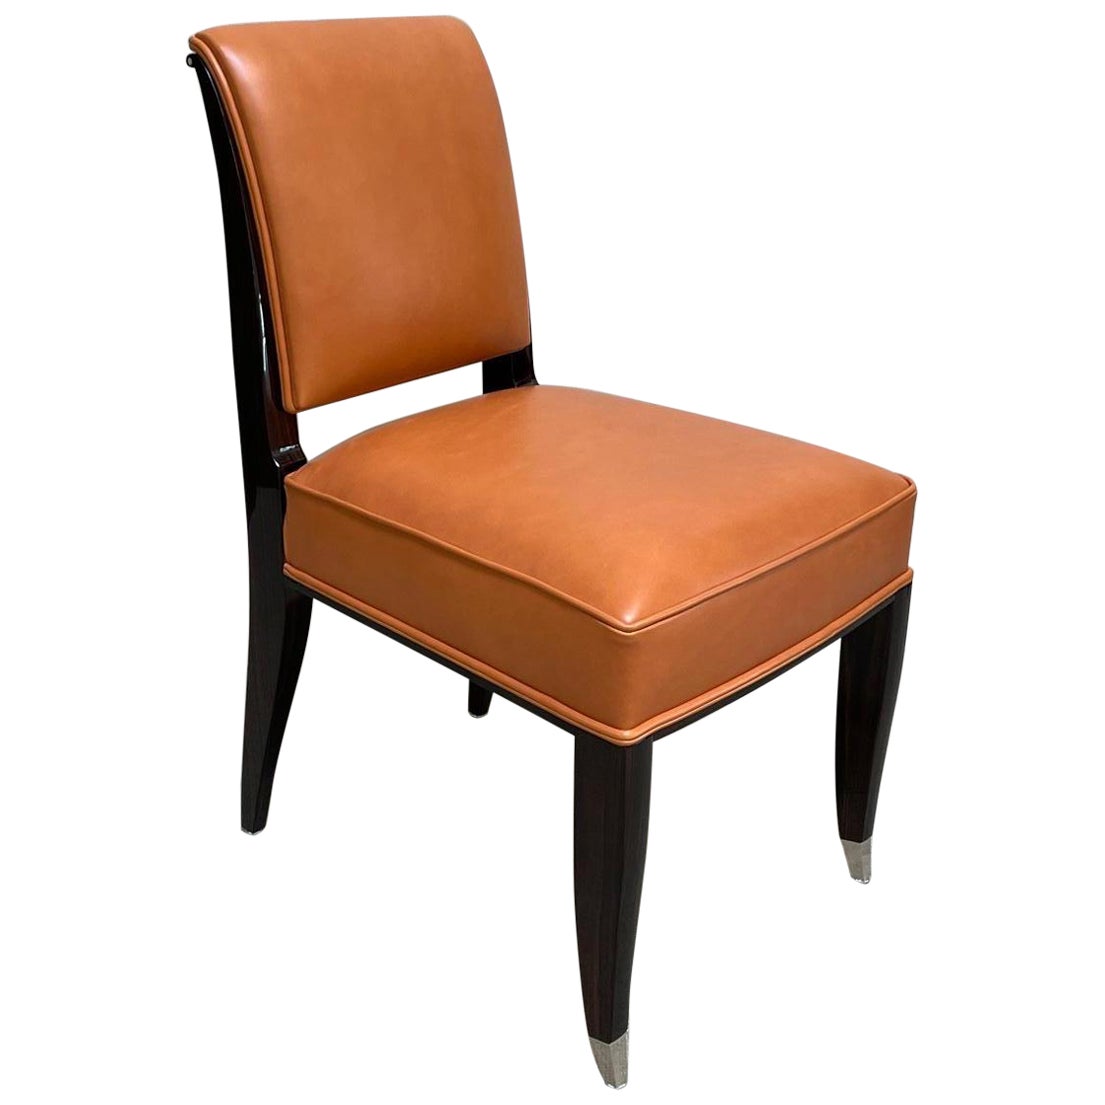 Elegant Art Déco Macassar Wood Chair Hand Crafted in the Style of J. E. Ruhlmann For Sale